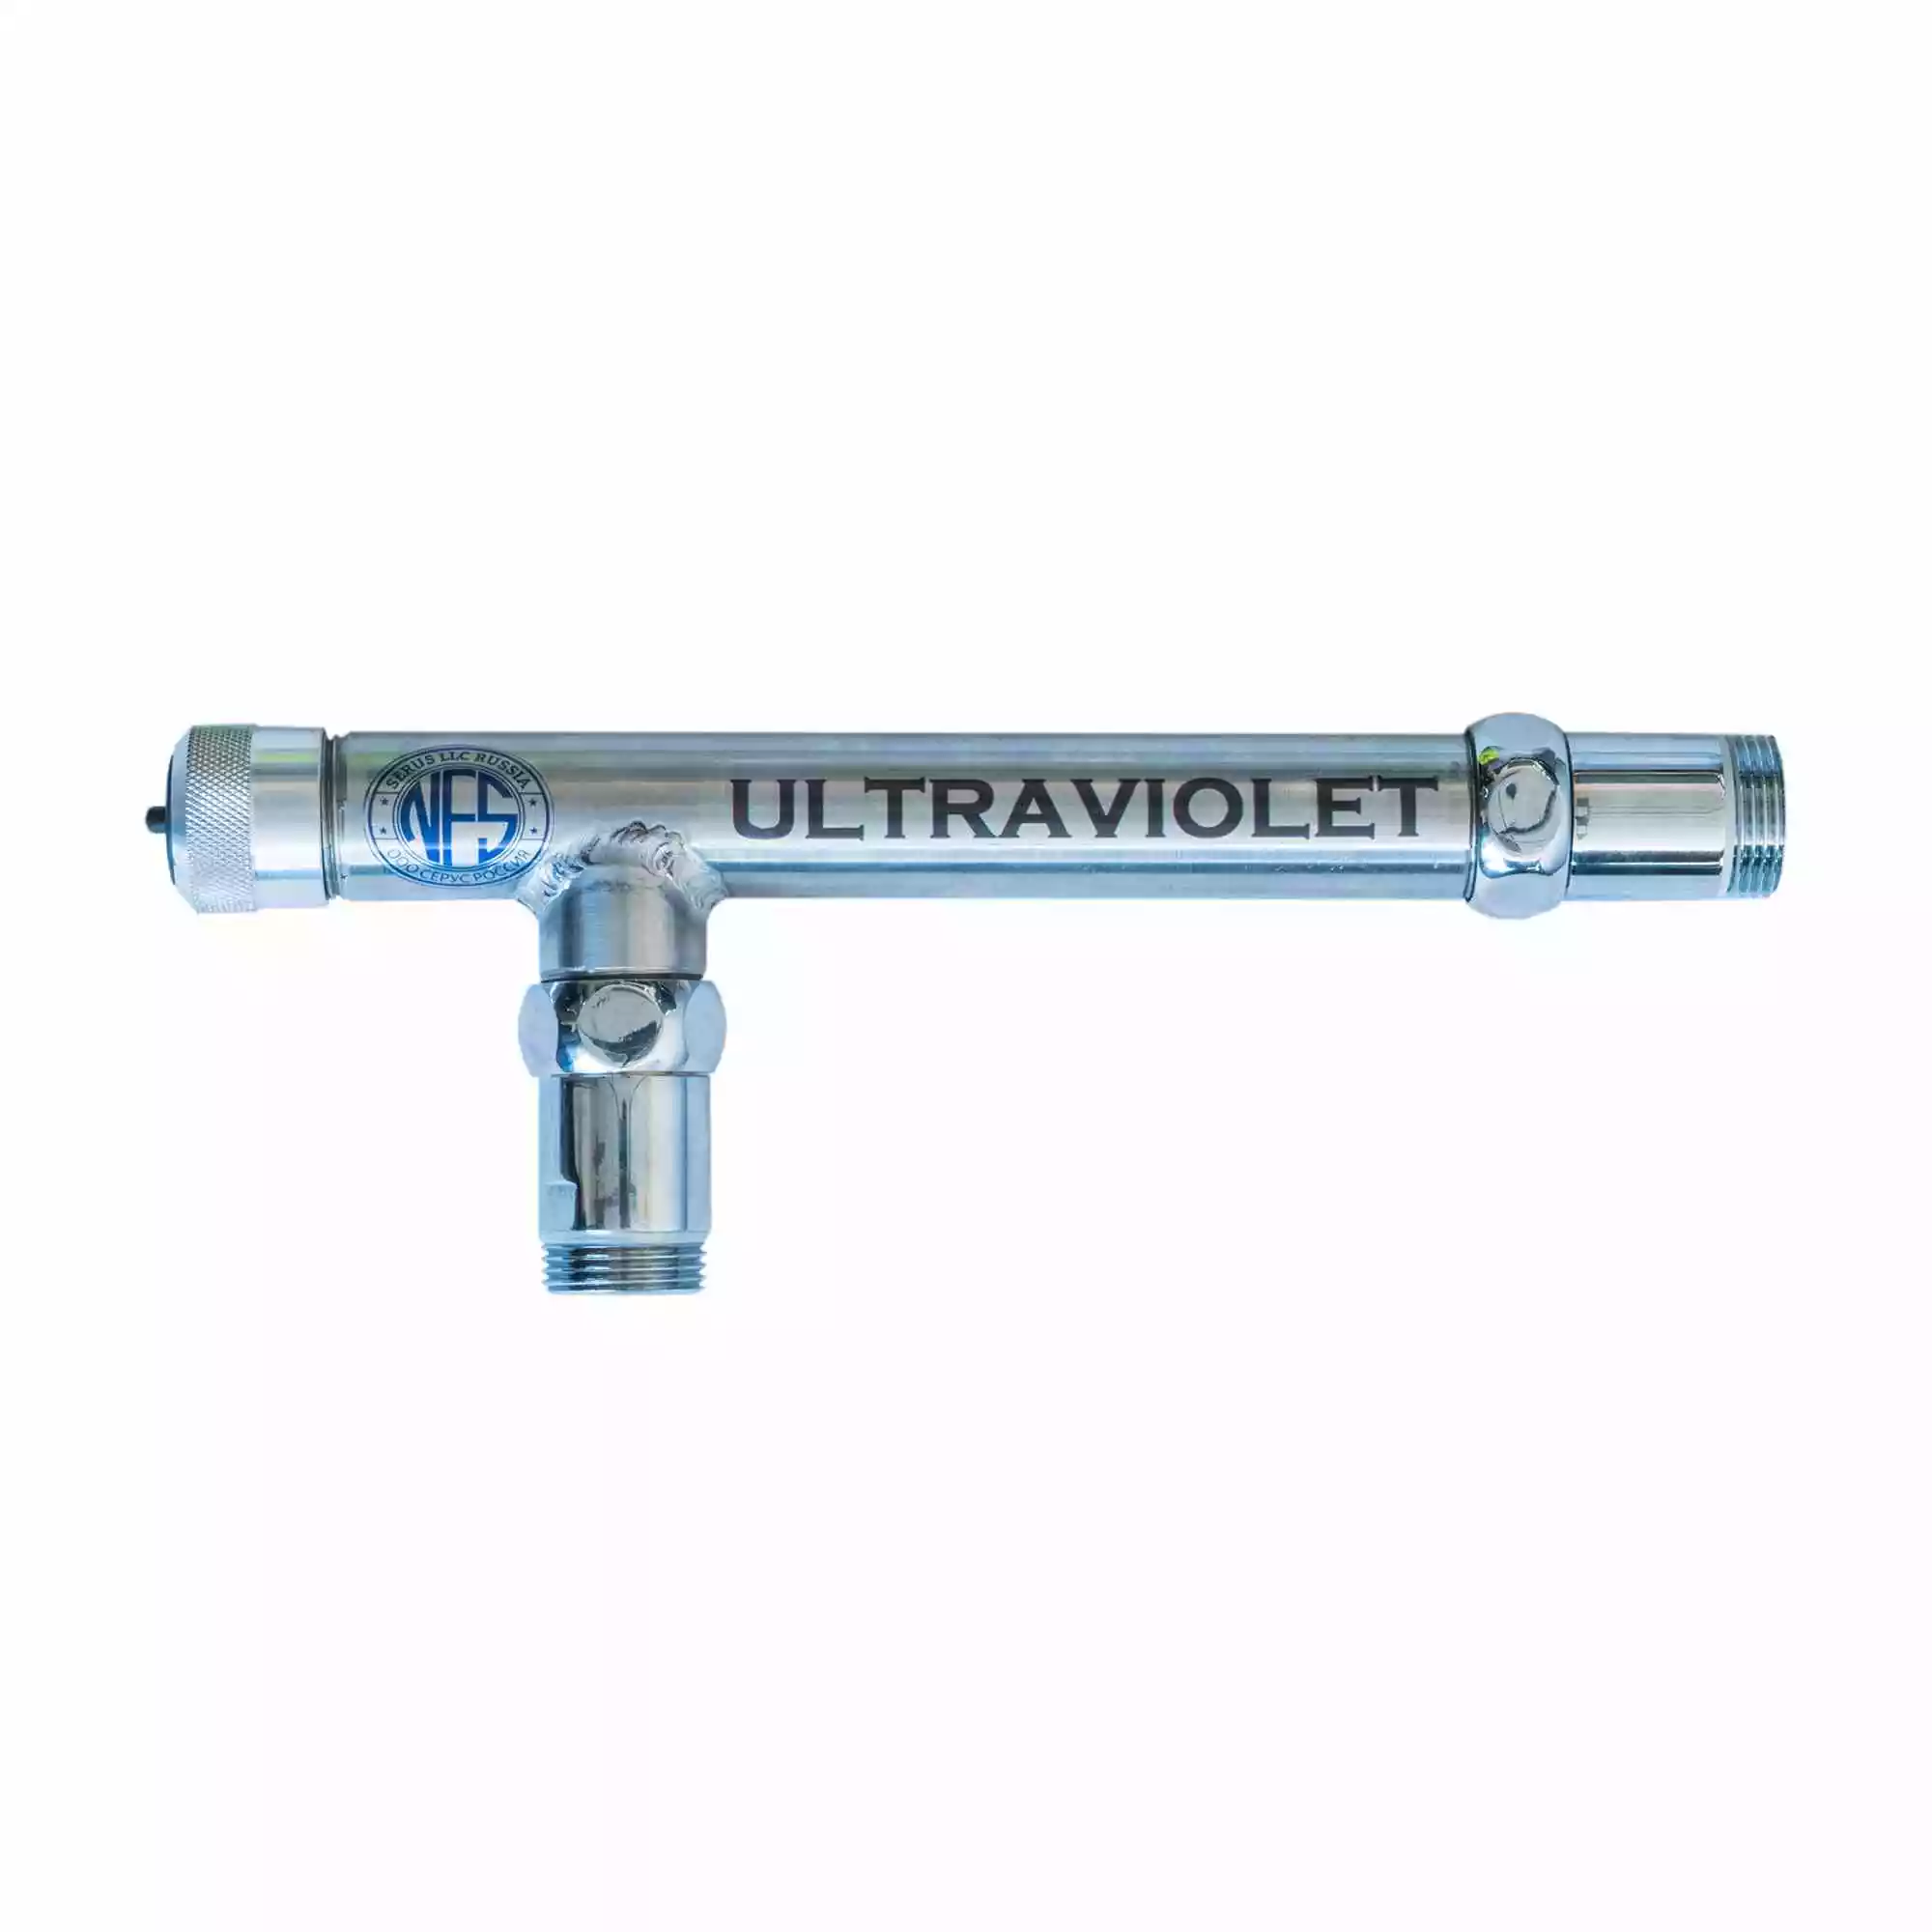 Ultraviolet UV Water Disinfection System SERUSUV1A